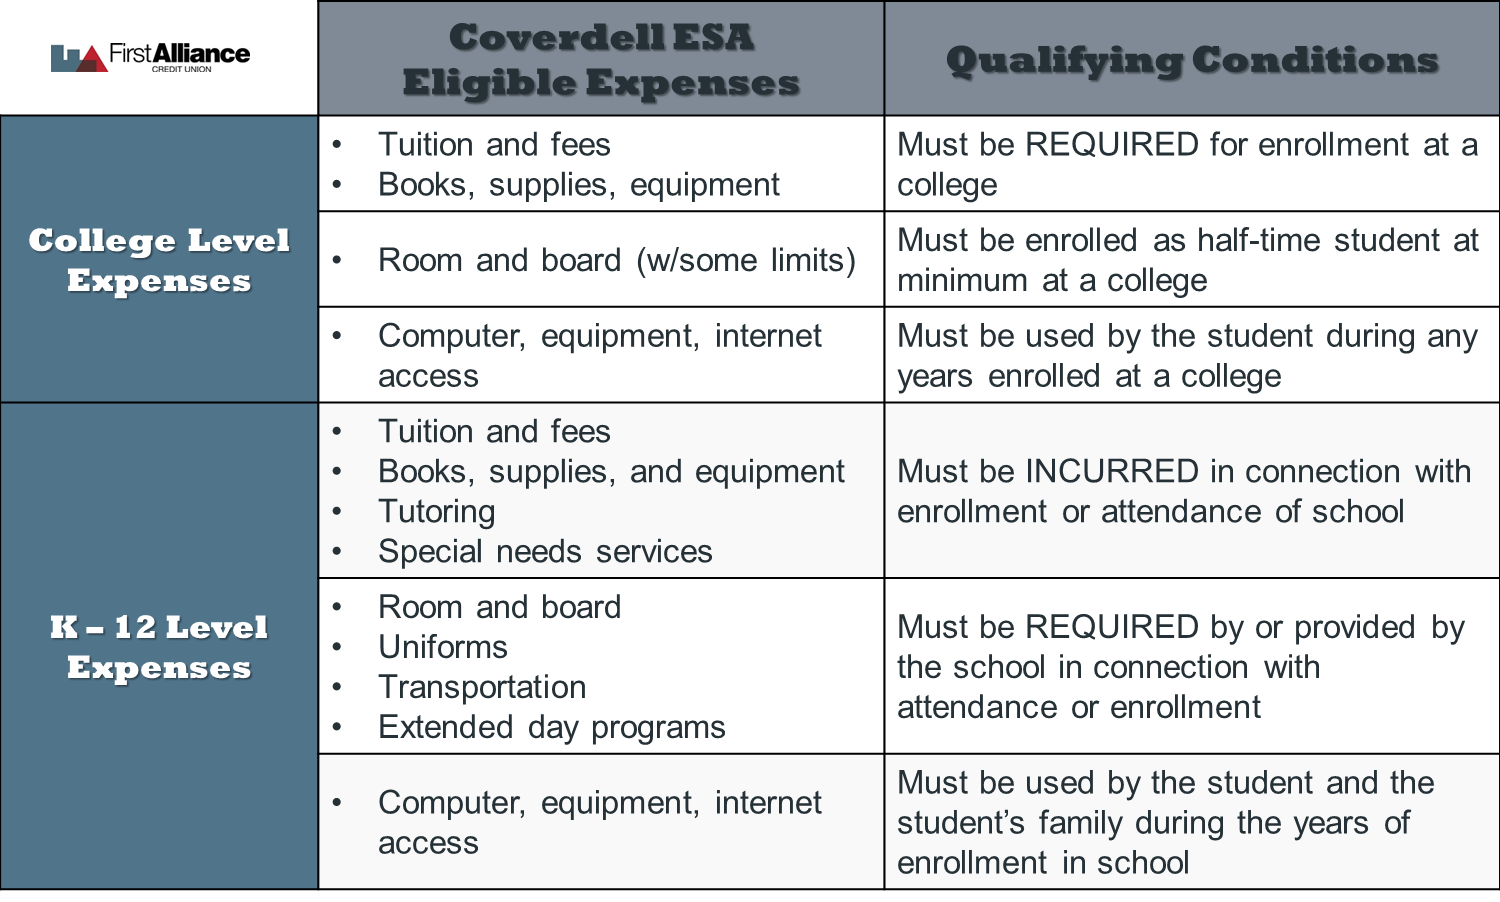 Coverdell ESA Qualified Expenses Chart